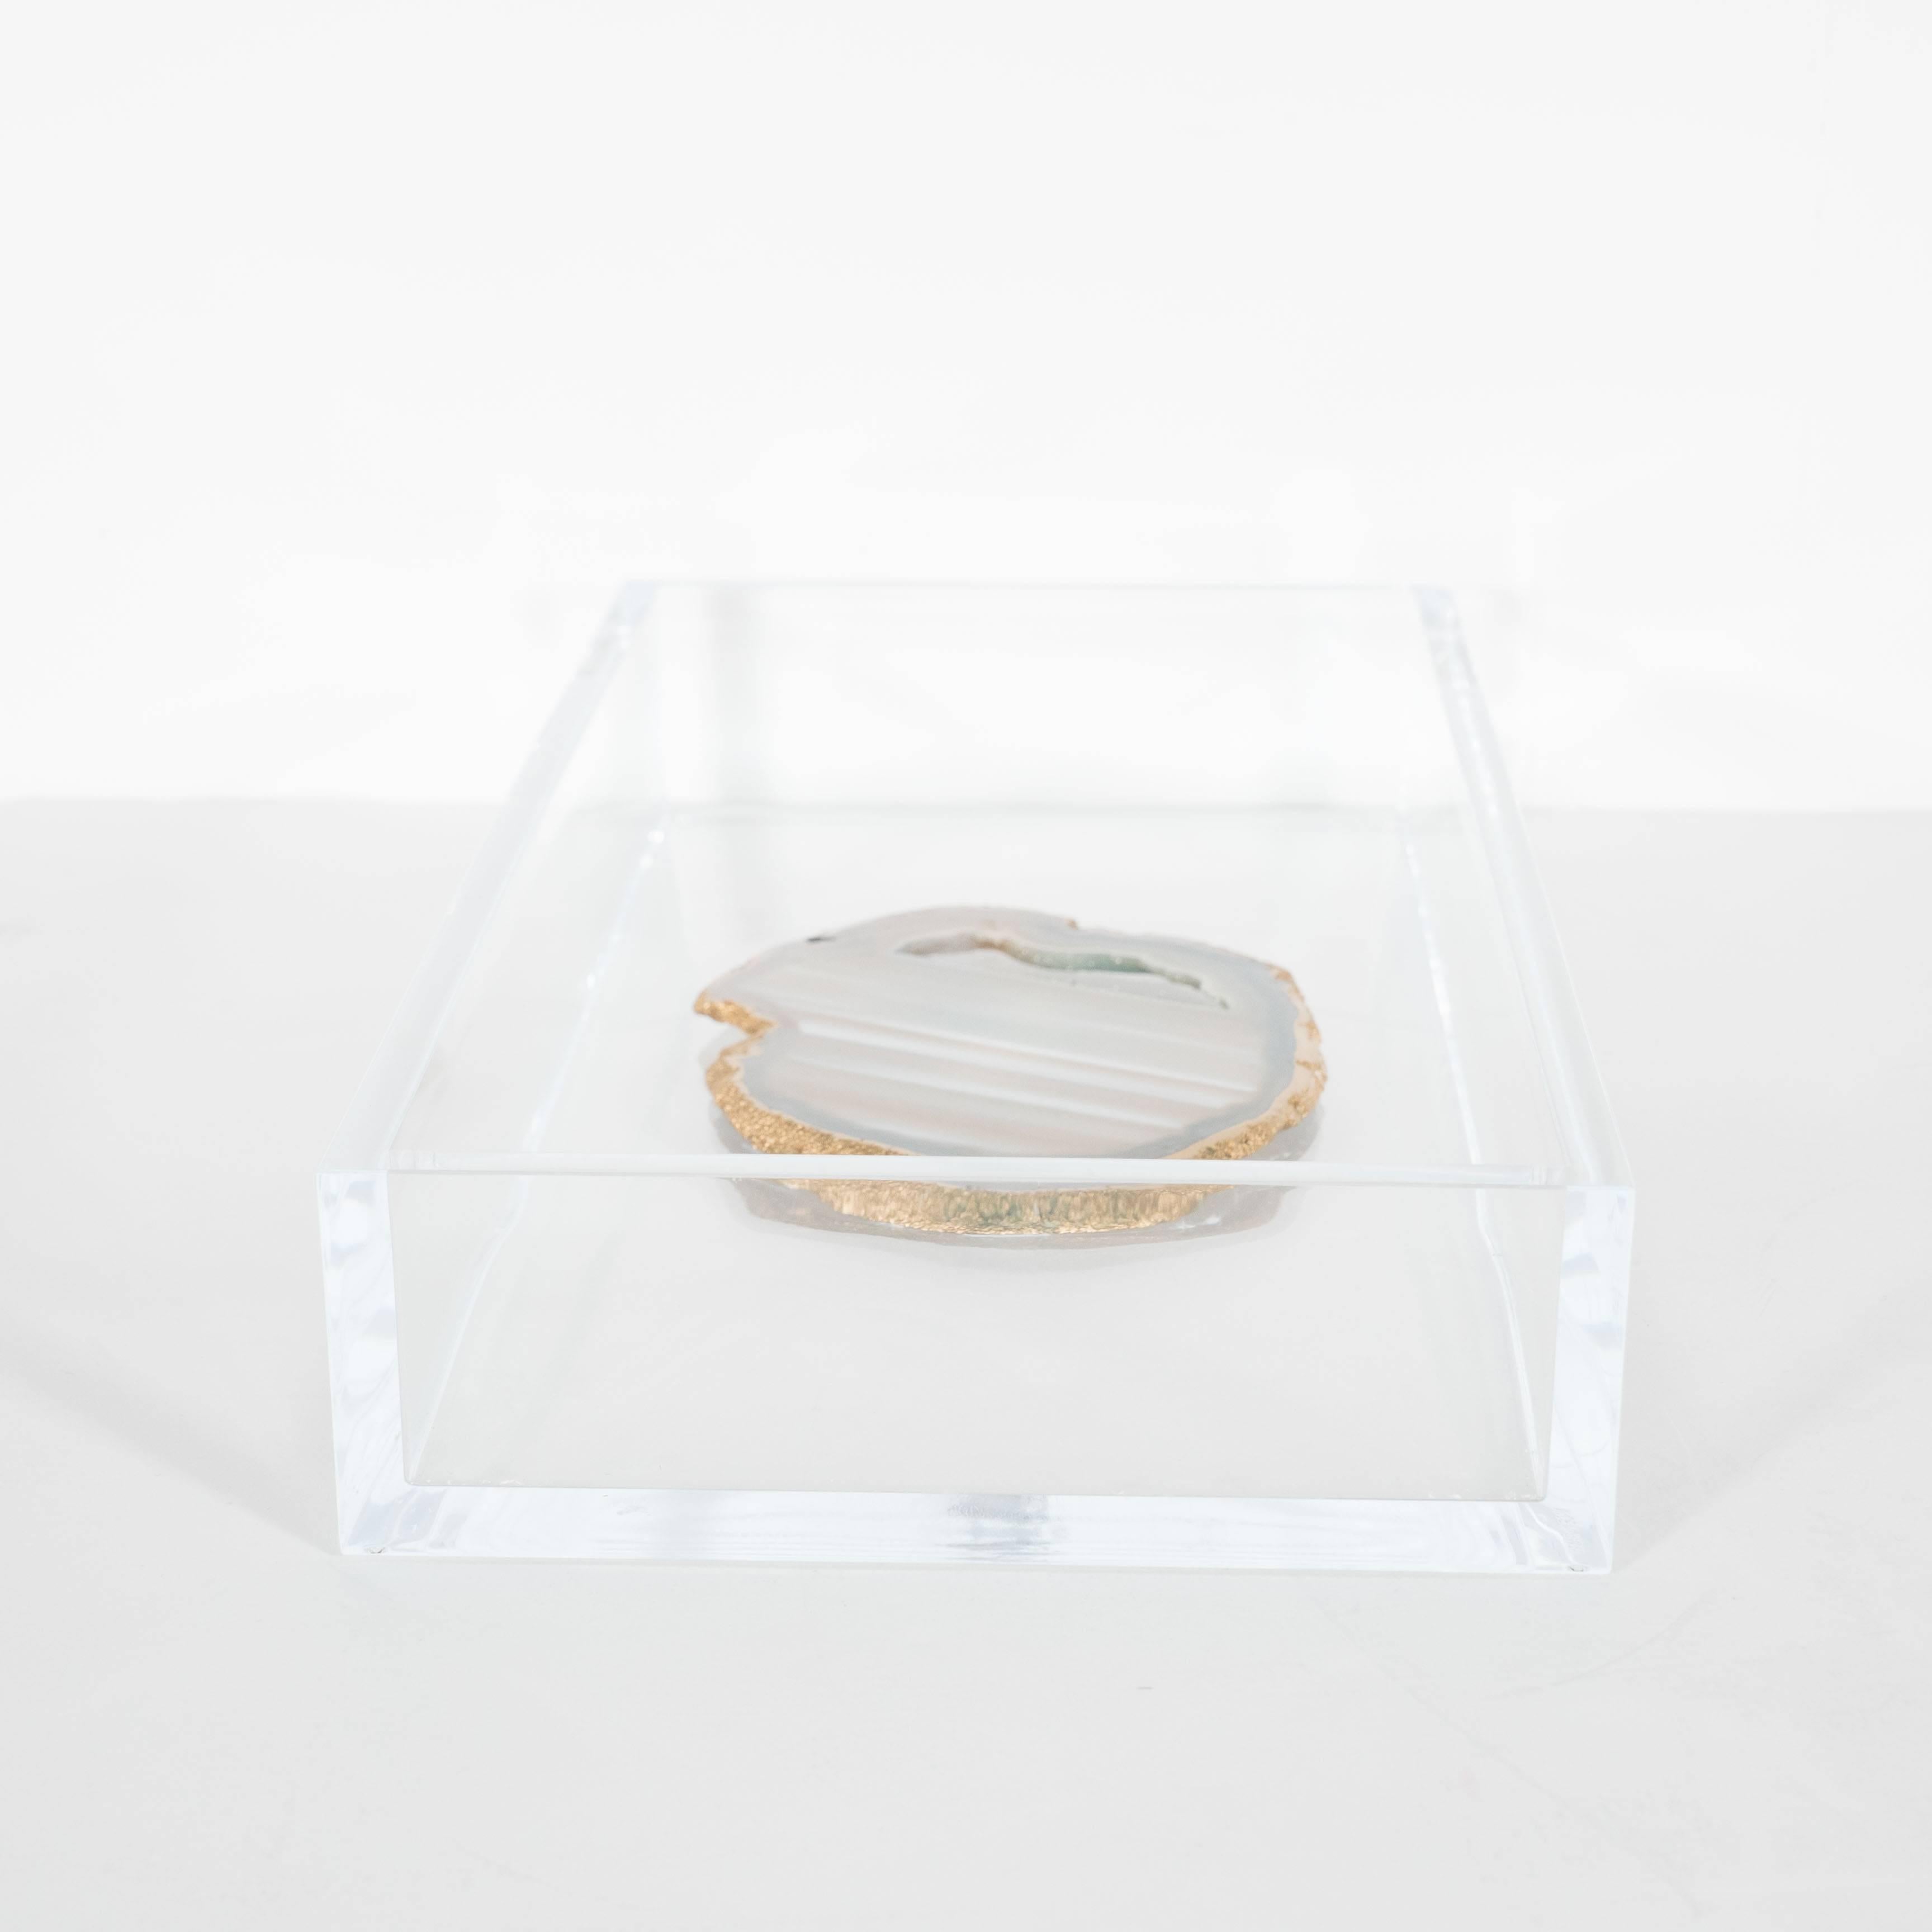 Modernist Organic Sliced Agate and Lucite Desk Tray or Catch All 2